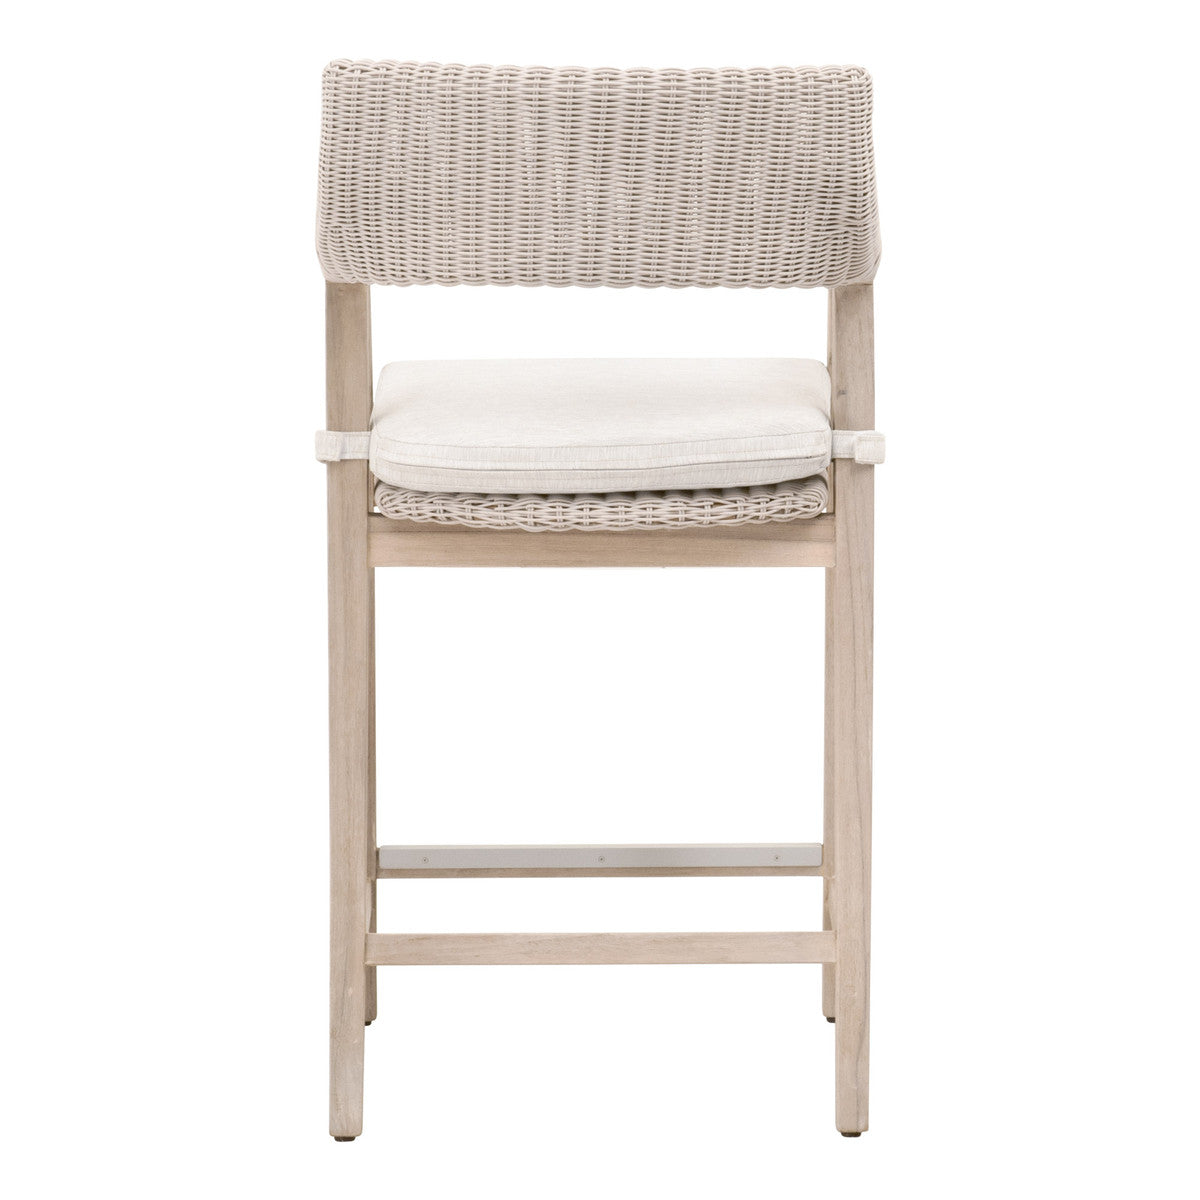 Lucia Outdoor Counter Stool in Pure White Synthetic Wicker, Performance White Speckle, Gray Teak - 6810CS.PW/WHT/GT